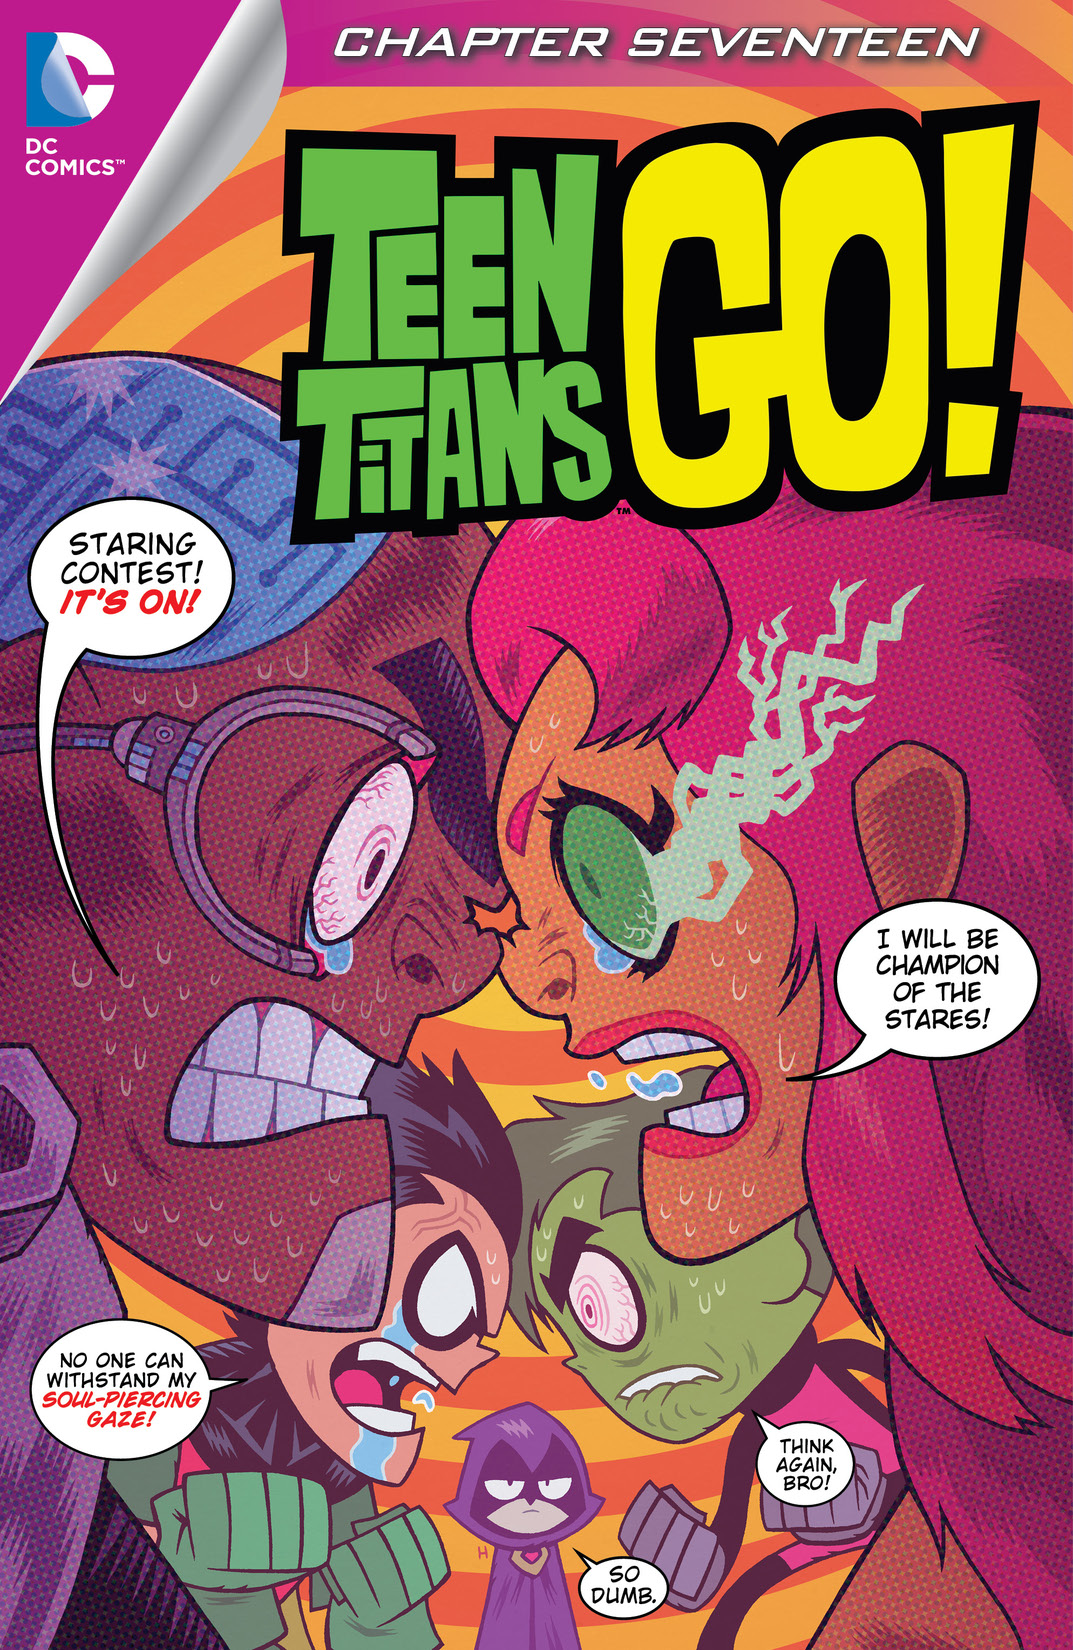 Teen Titans Go! (2013-) #17 preview images